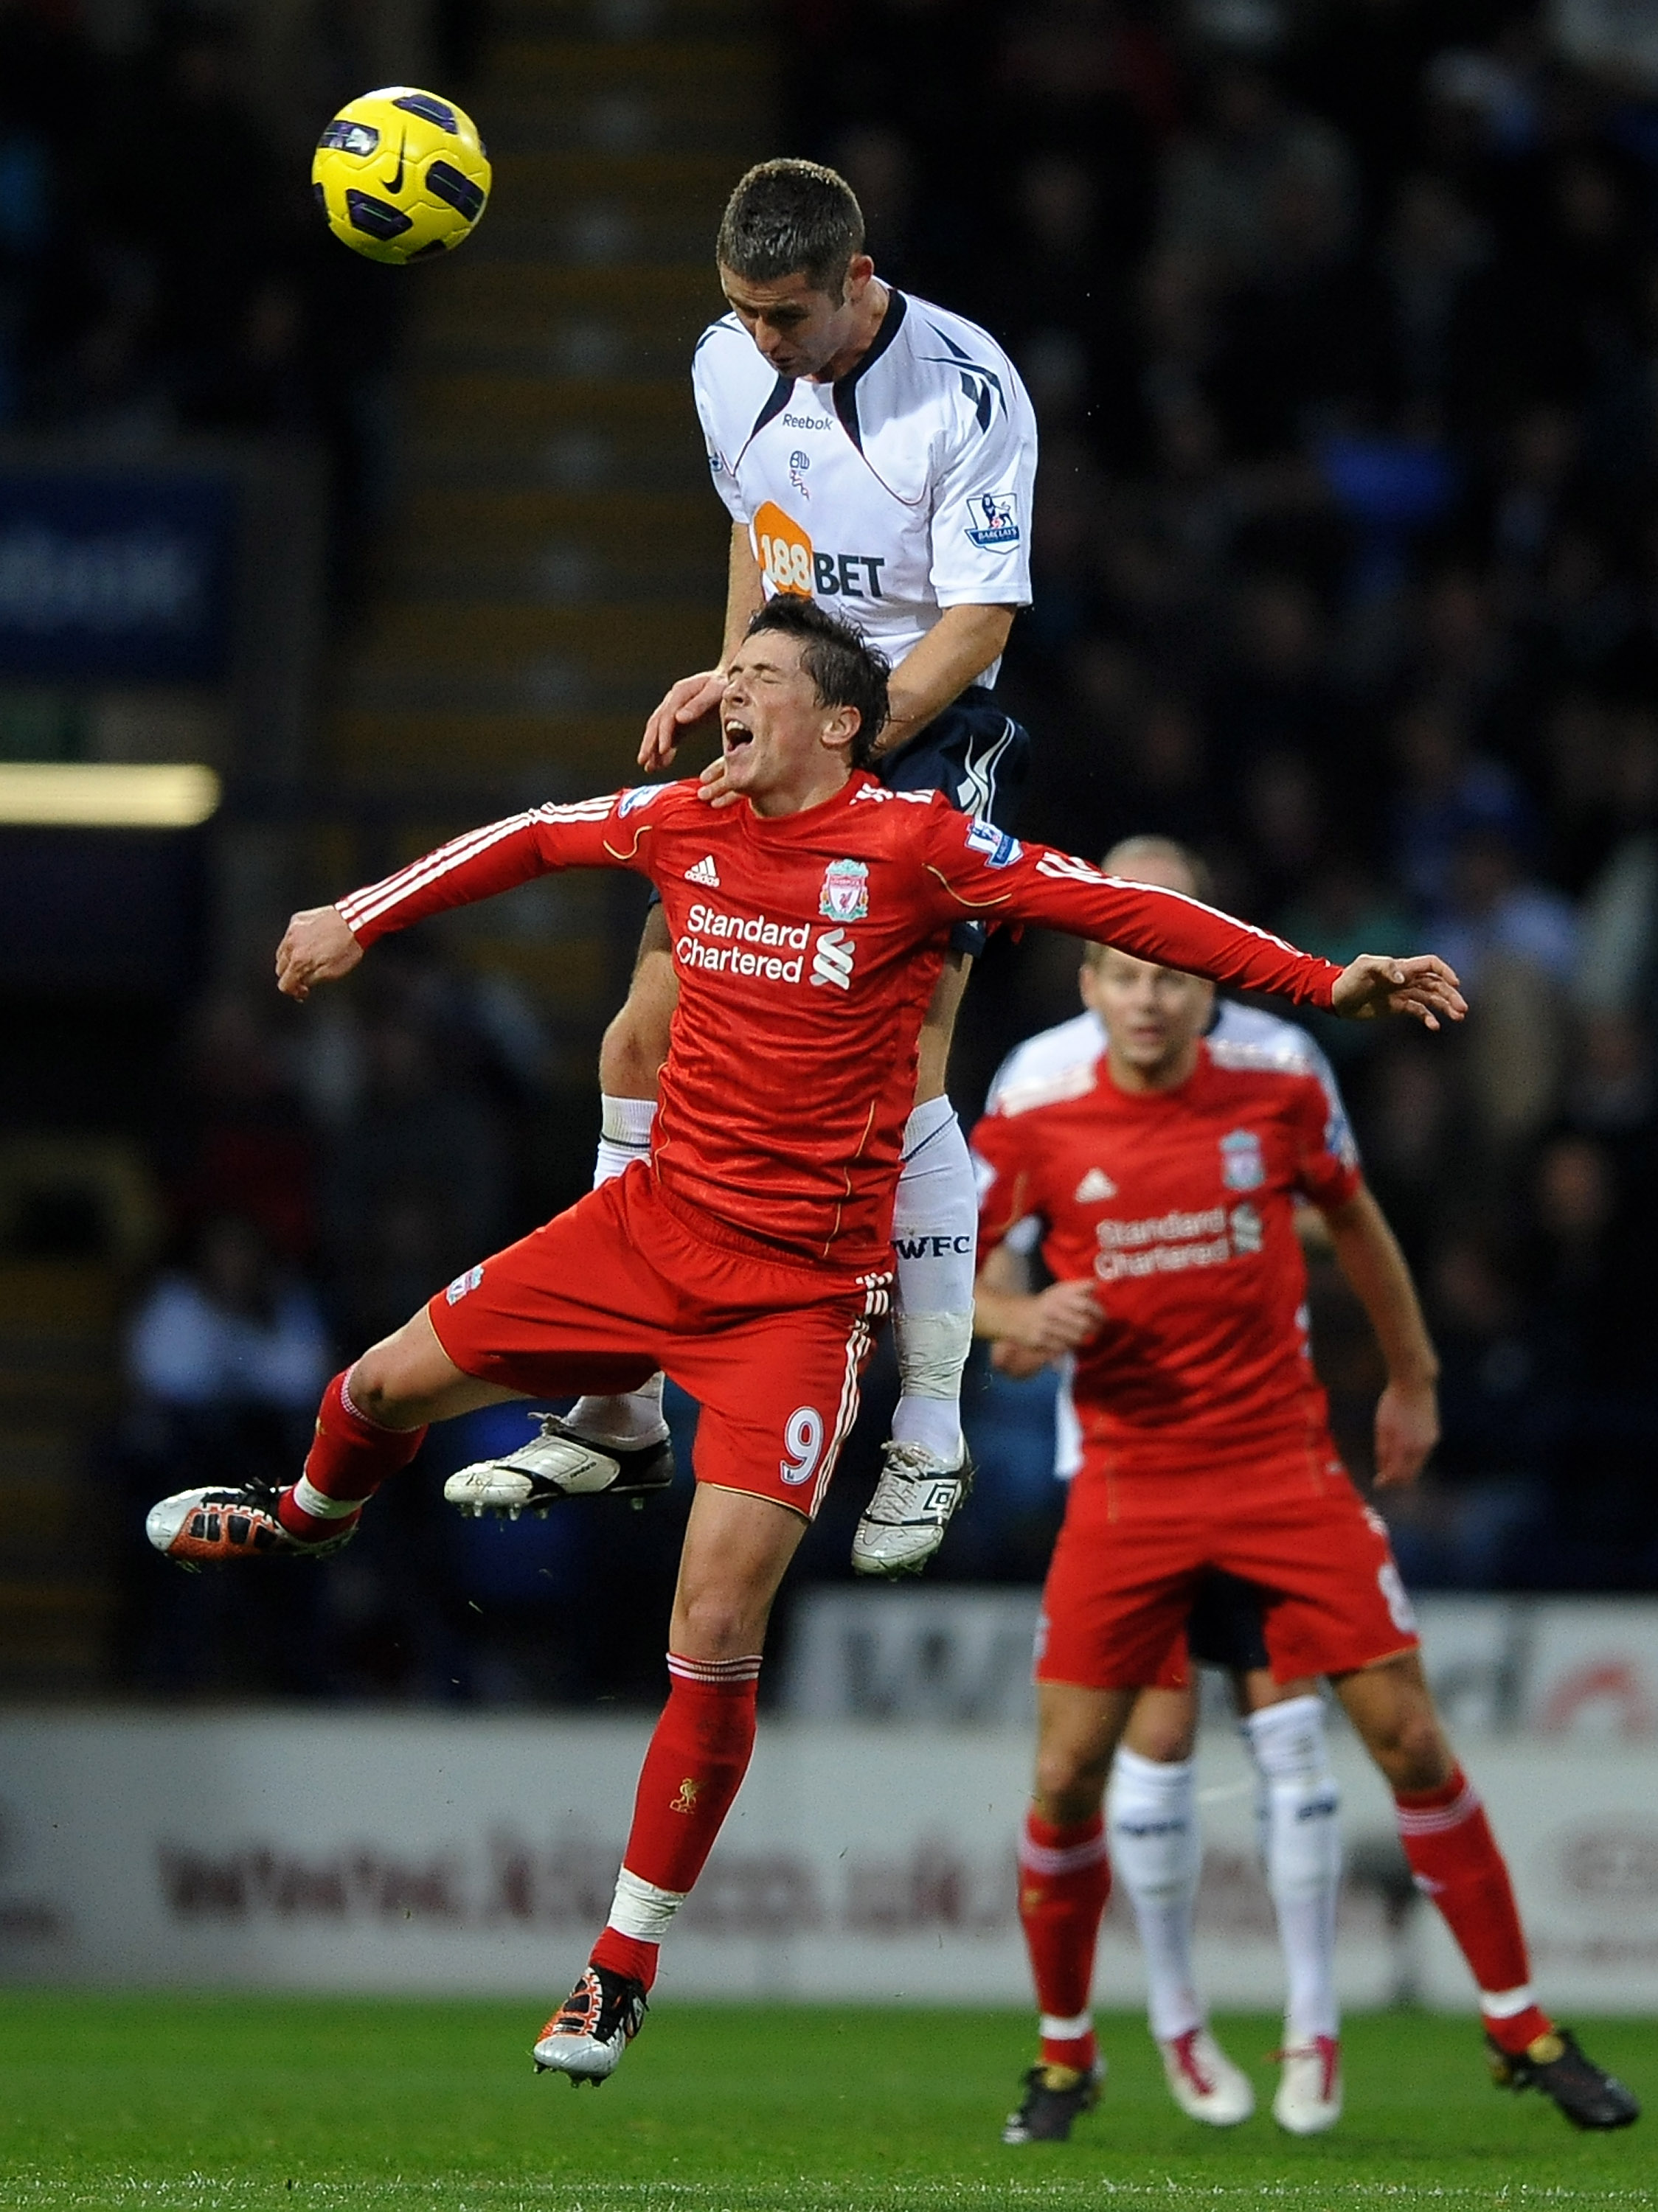 BOLTON, ENGLAND - OCTOBER 31:  Fernando Torres of Liverpool tangles with Gary Cahill of Bolton Wanderers during the Barclays Premier League match between Bolton Wanderers and Liverpool at the Reebok Stadium on October 31, 2010 in Bolton, England. (Photo b